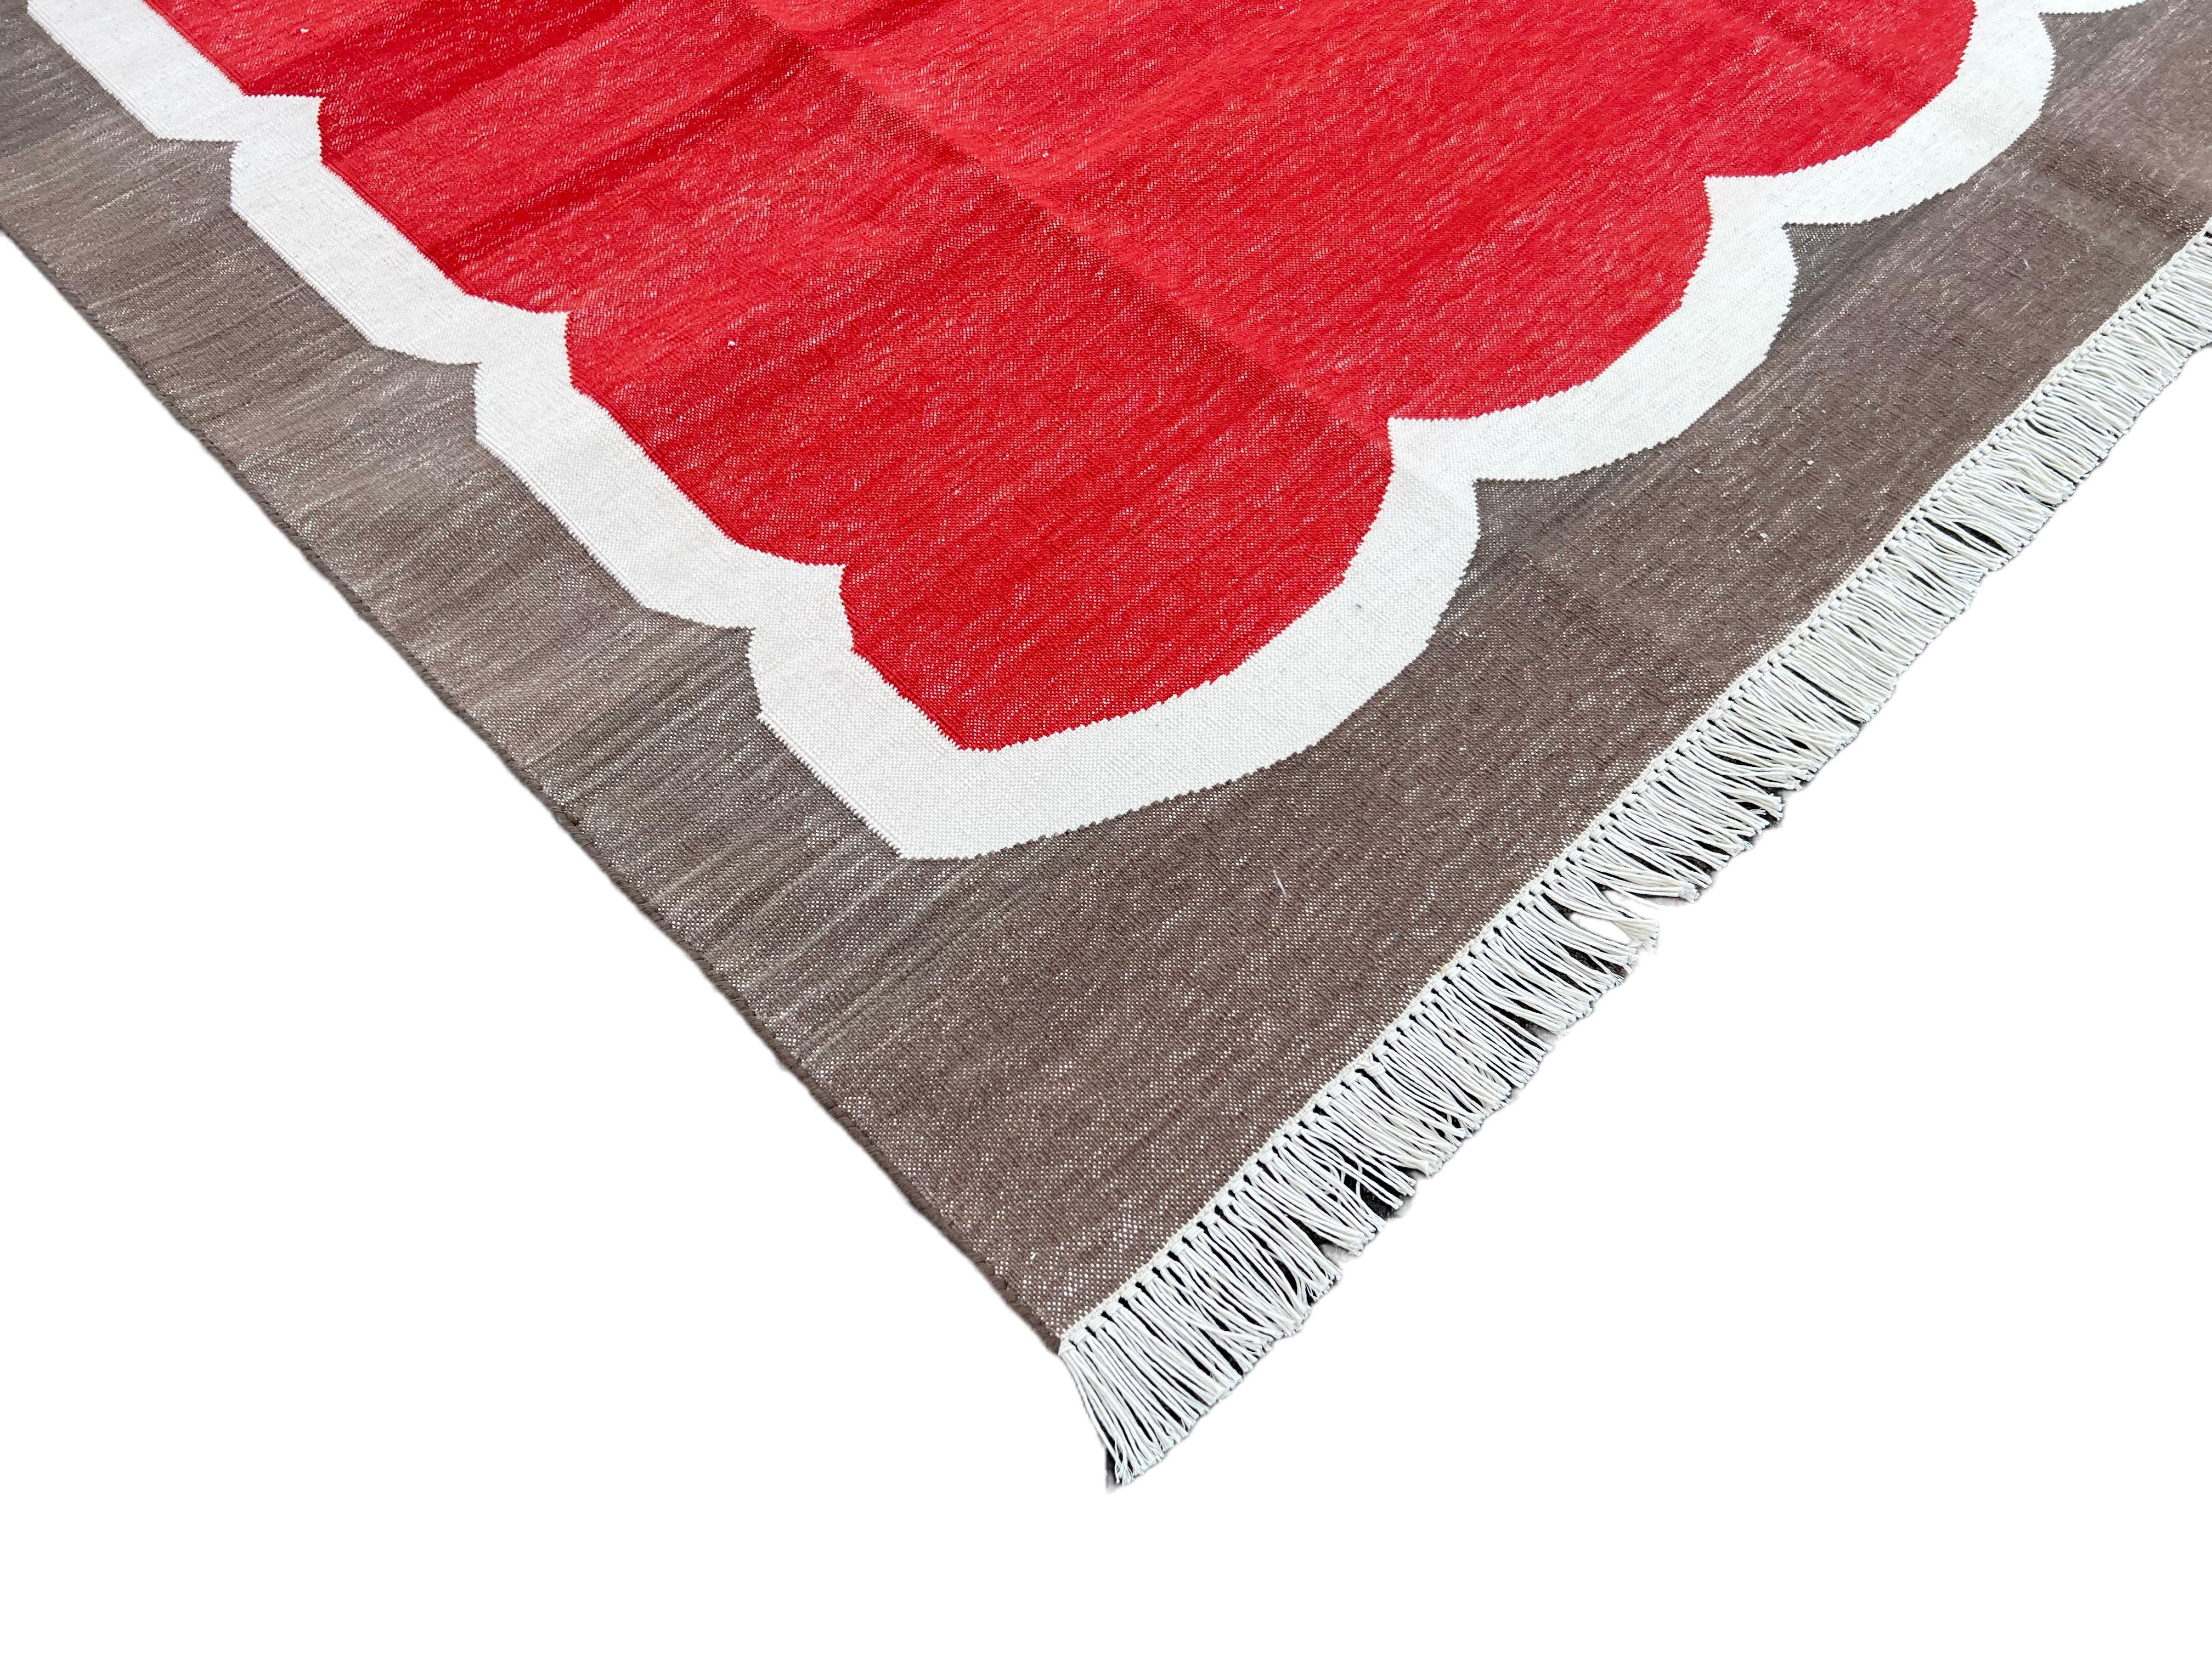 Cotton Vegetable Dyed Red, Cream And Brown Scalloped Striped Indian Dhurrie Rug-5'x7' 
These special flat-weave dhurries are hand-woven with 15 ply 100% cotton yarn. Due to the special manufacturing techniques used to create our rugs, the size and